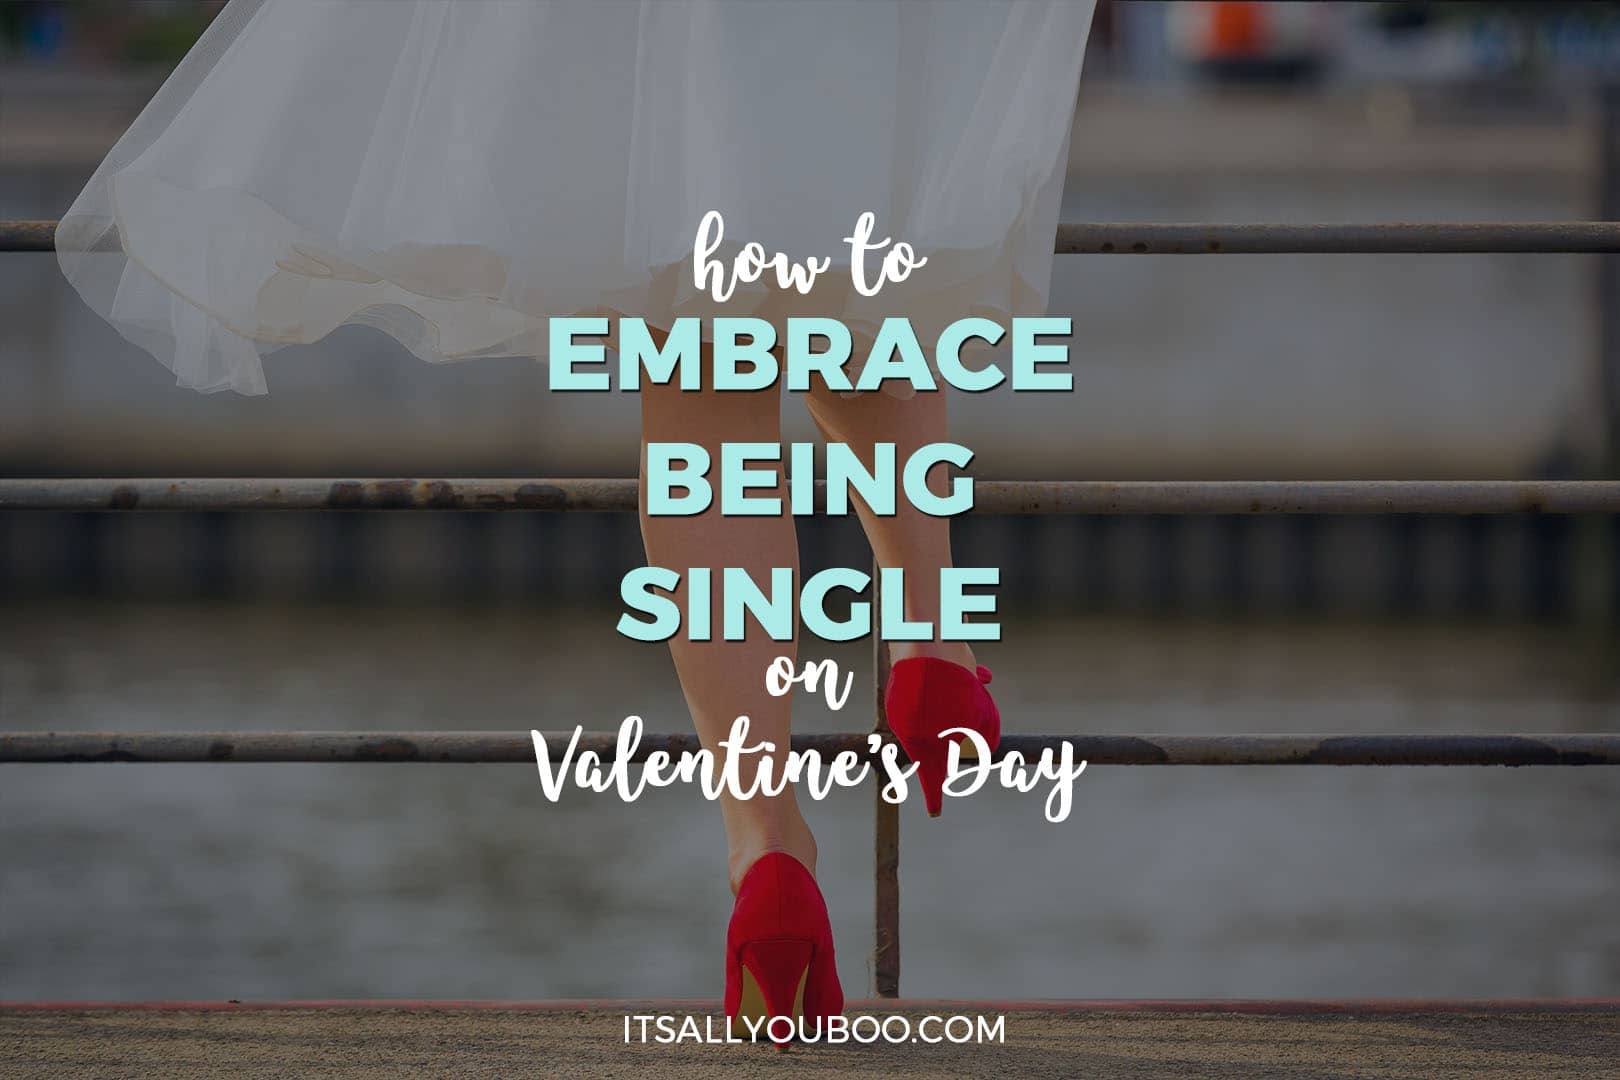 How to Embrace Being Single on Valentine's Day